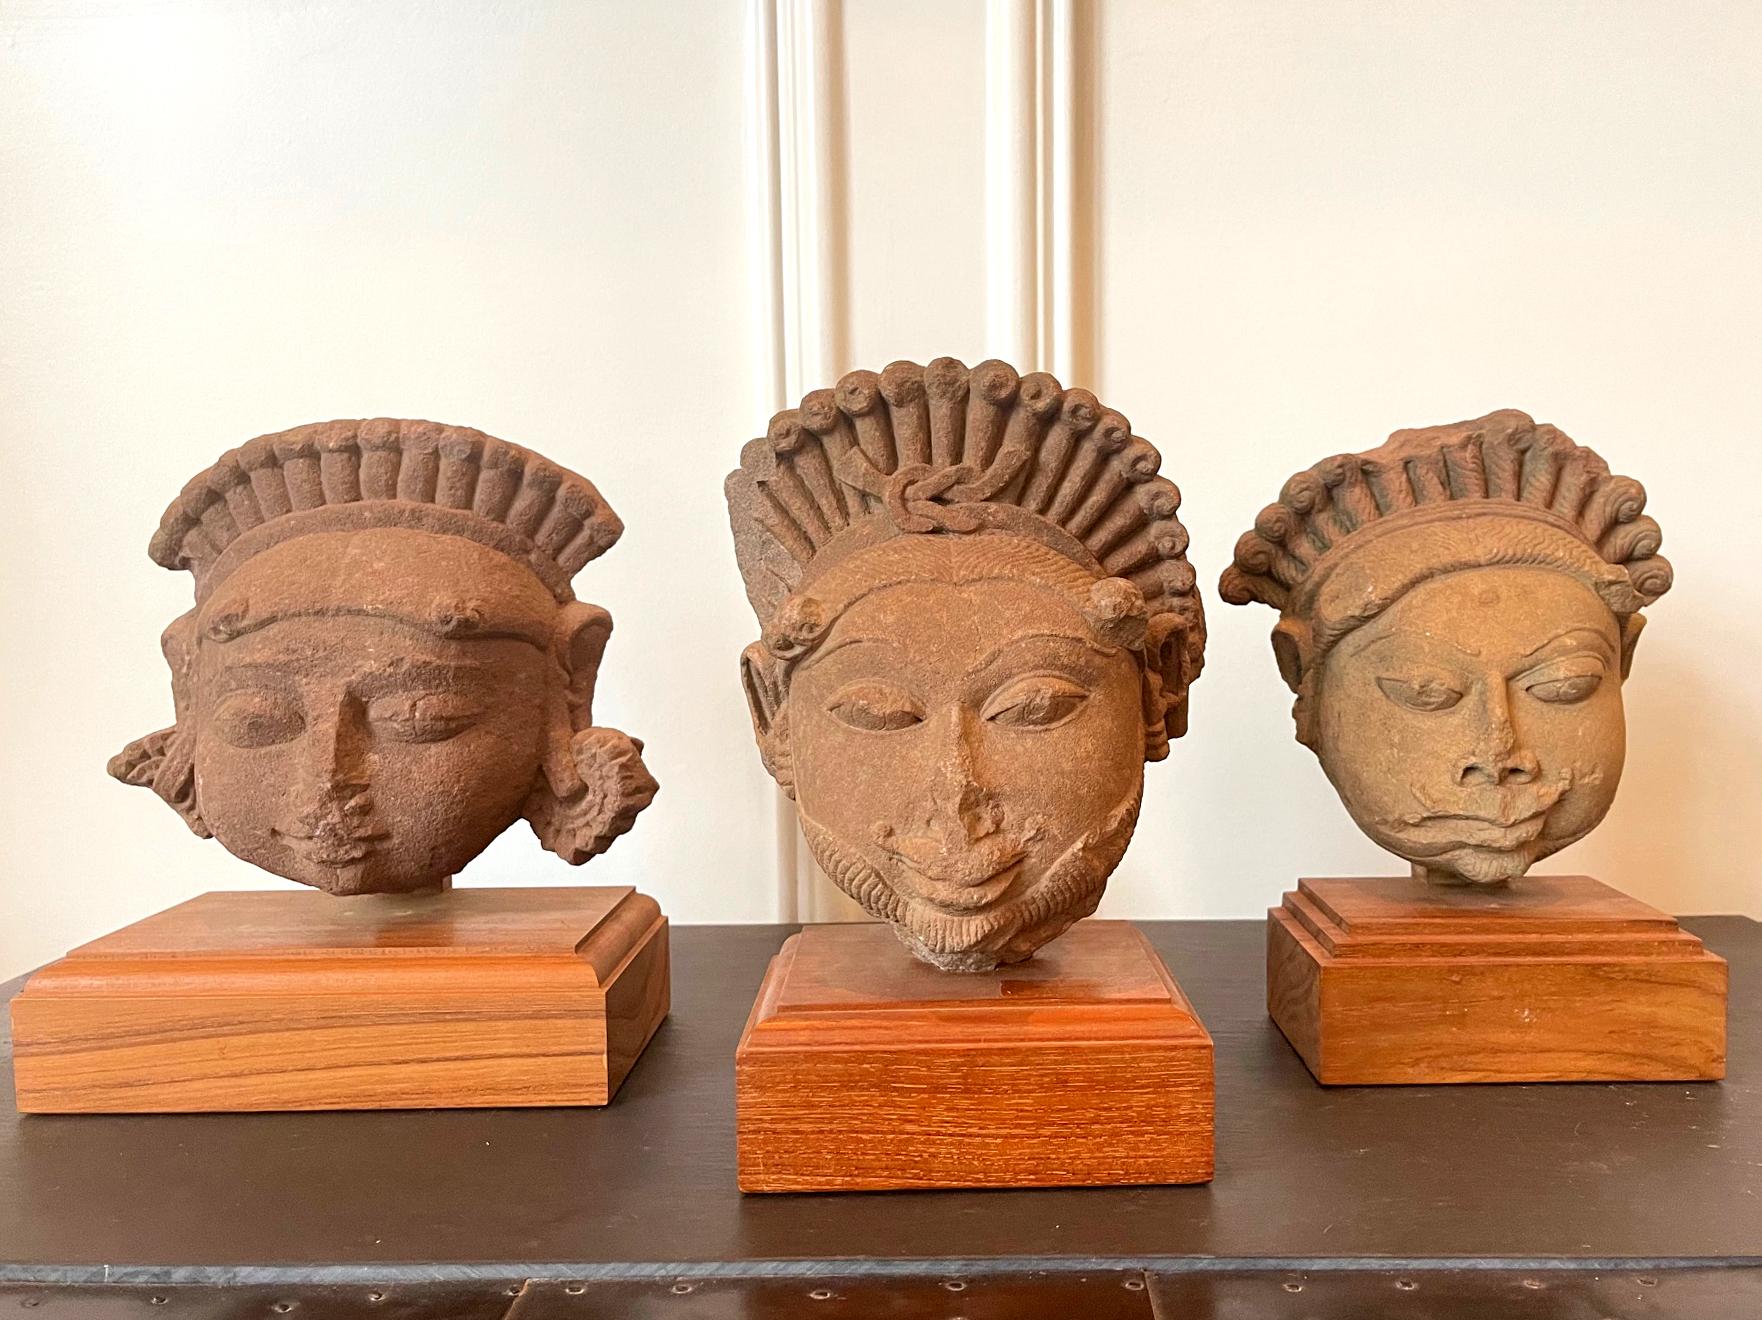 A collection of three carved sandstone heads on wood display stands from Northern India Rajasthan or 
 Madhya Pradesh, circa 11-12th century. Fragmented from large whole-body statue, these red sandstone heads exhibit very fine carving, typical of